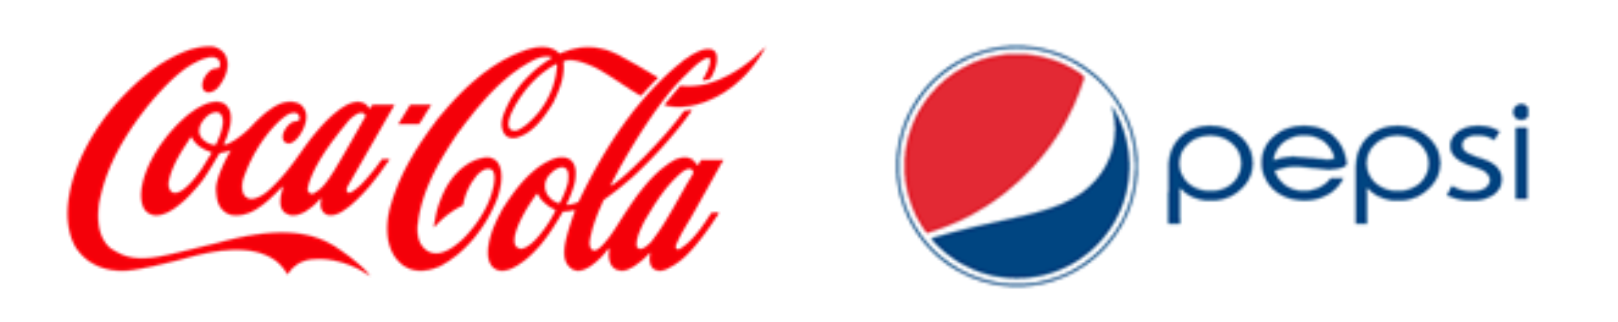 Coca-Cola and Pepsi logos in the 2010s